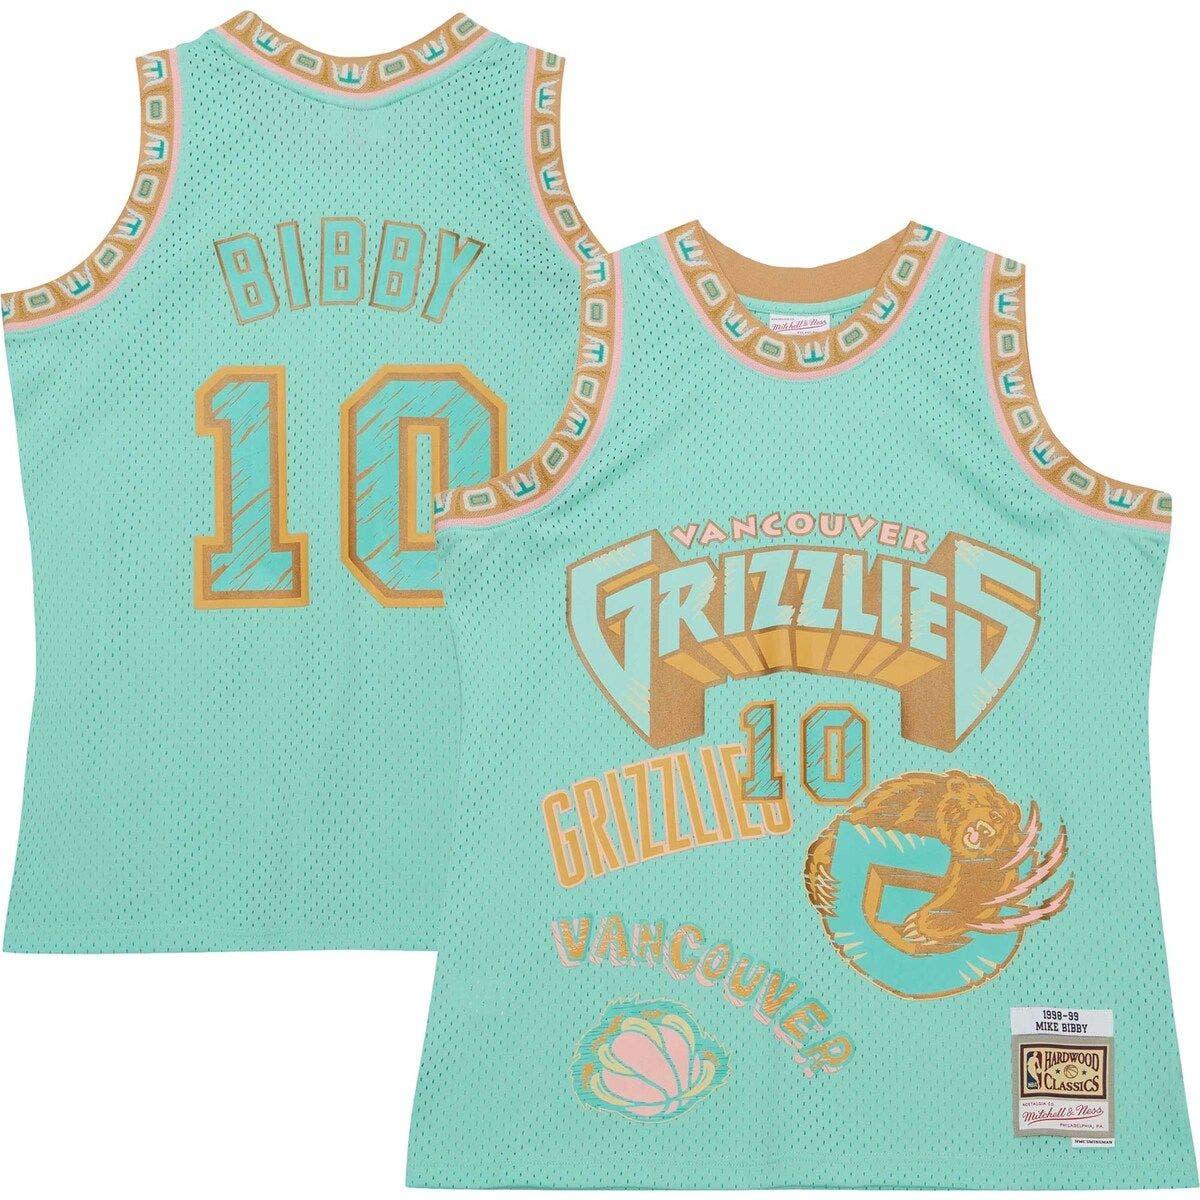 Mitchell & Ness Mike Bibby White Vancouver Grizzlies 1998 Doodle Swingman Jersey